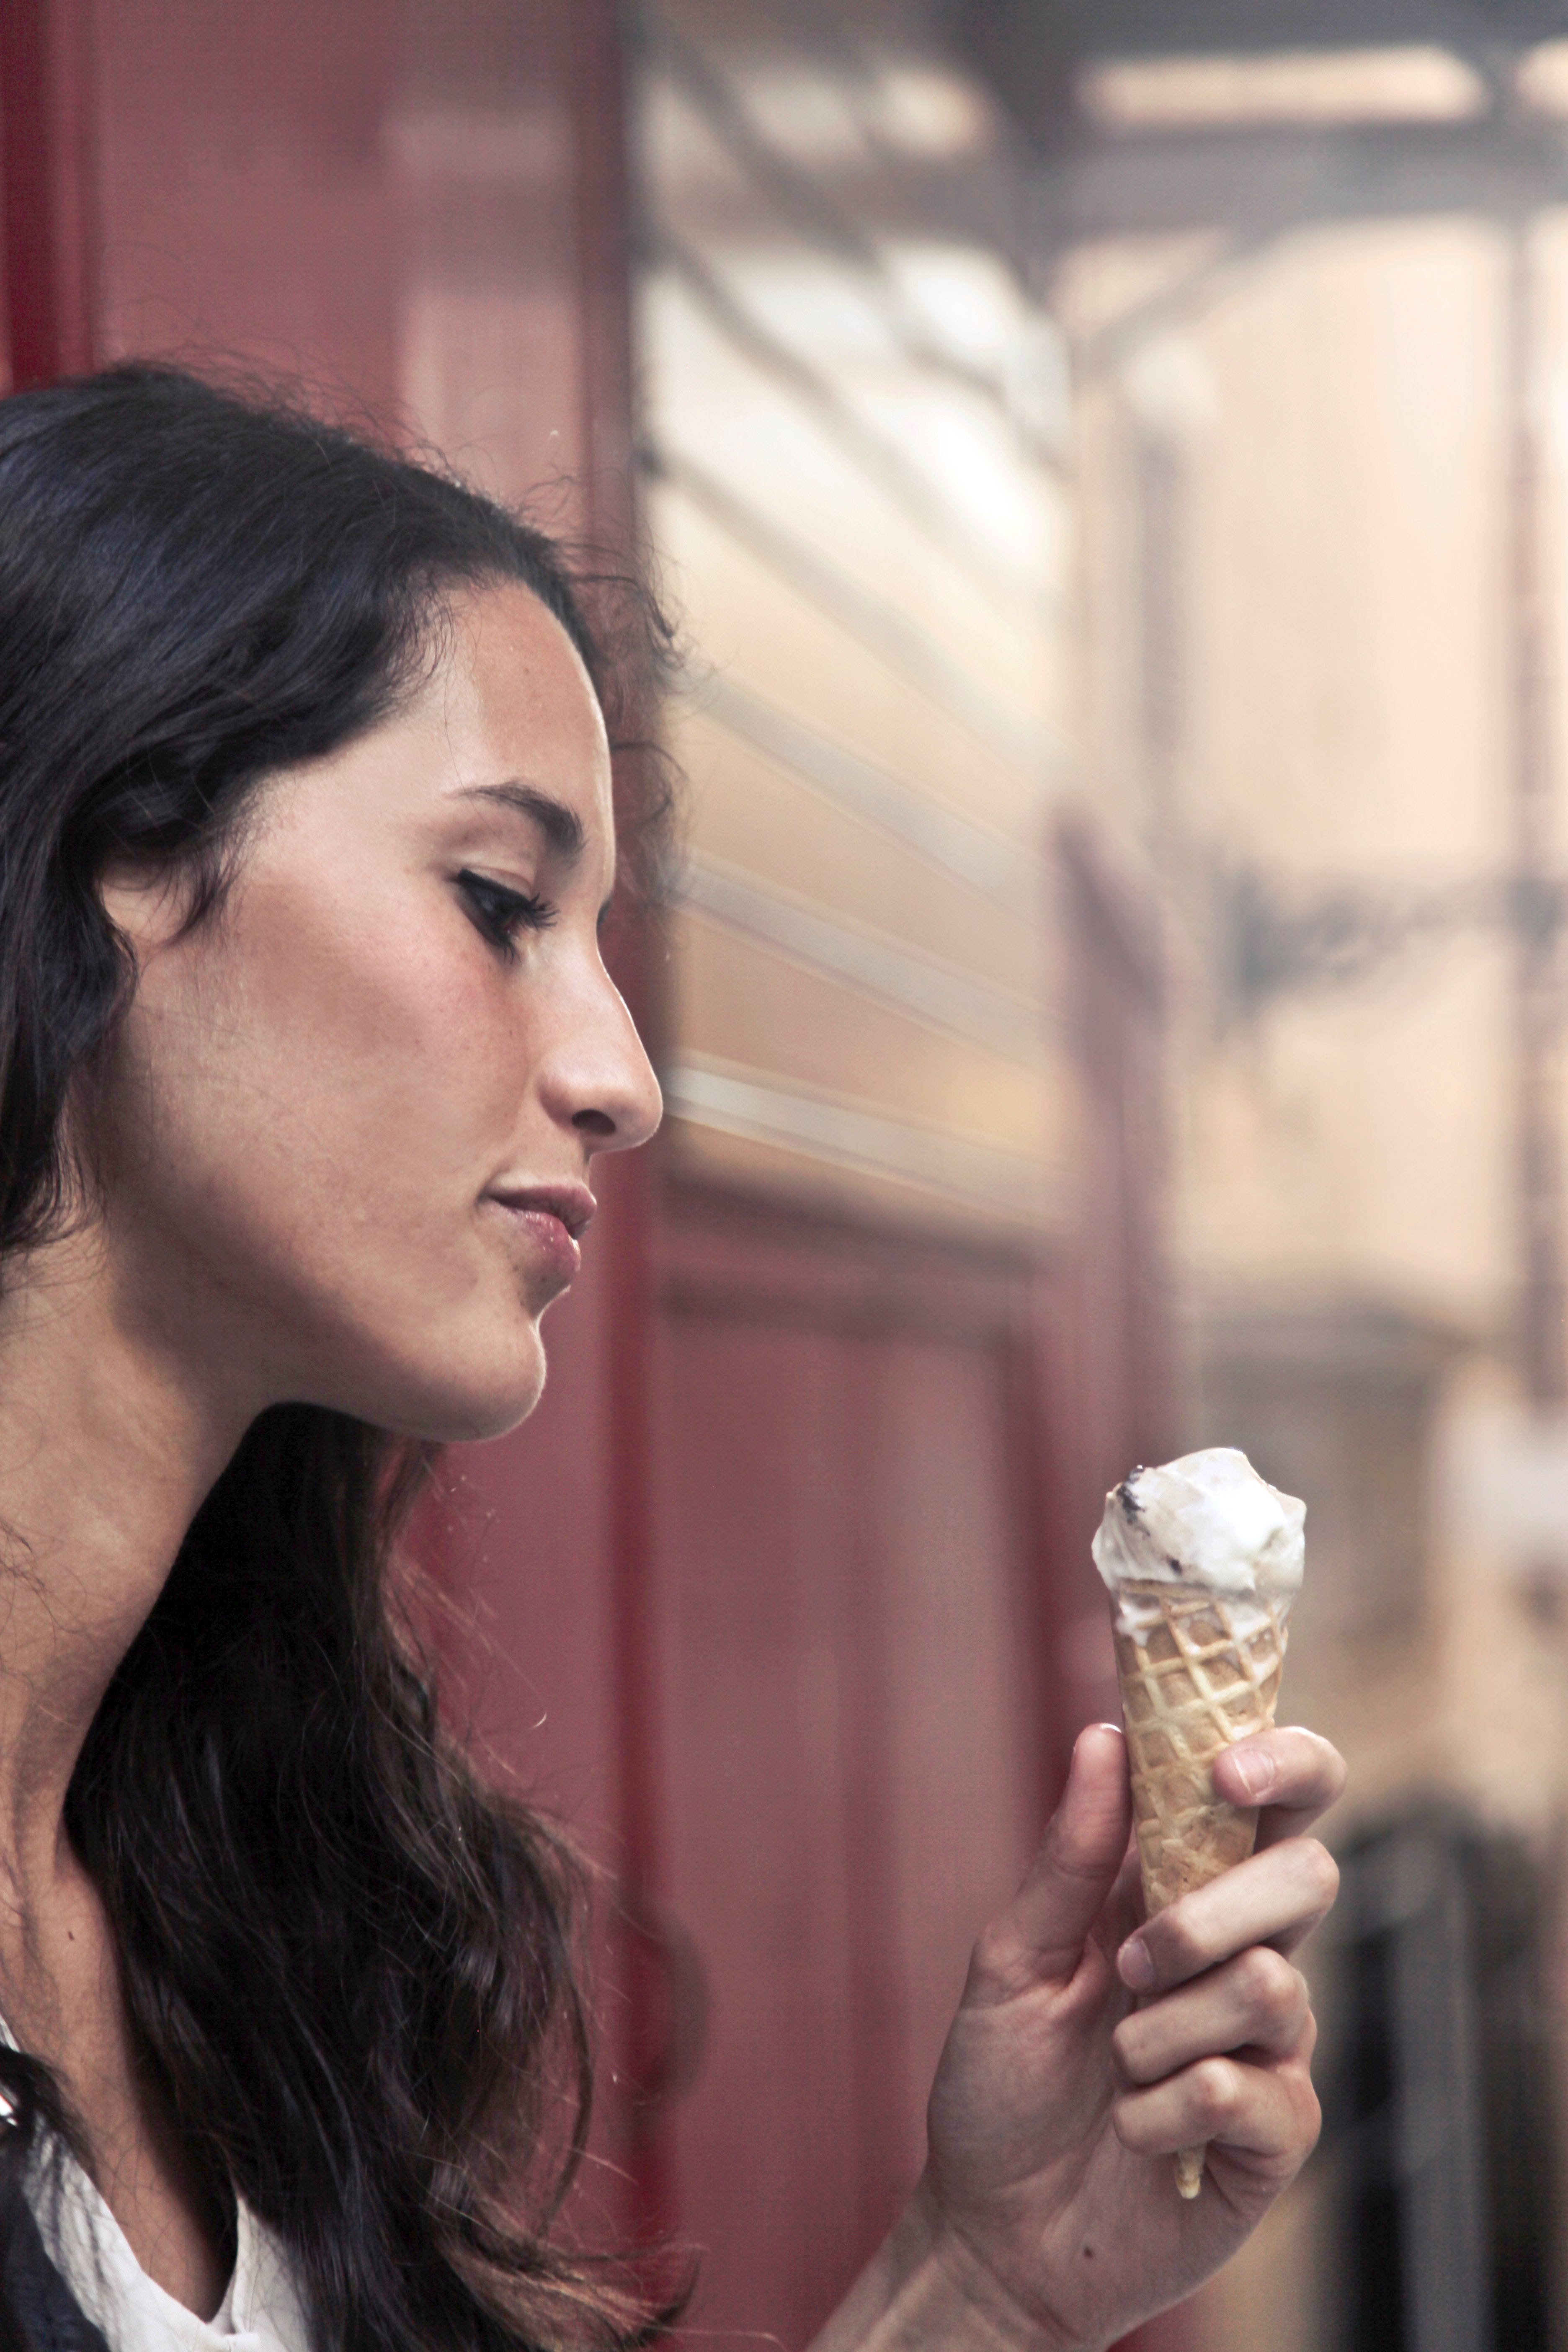 Photography of a woman holding ice cream